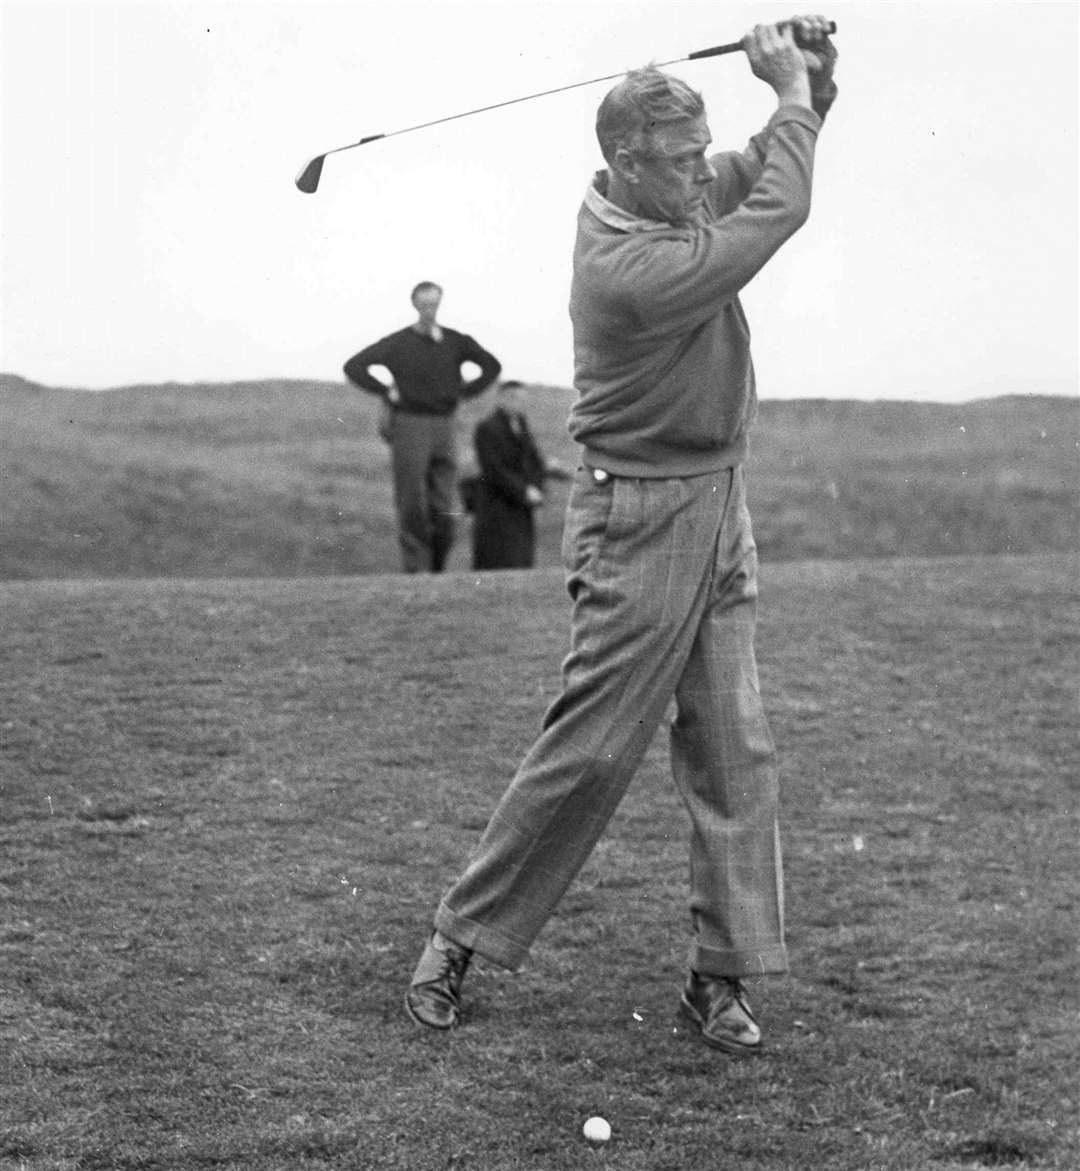 The Duke of Windsor (formerly King Edward VIII, until his abdication in 1936) played a round of golf at the Royal St George's Club, Sandwich, in October 1952. He was staying at a hotel on the front at Sandwich Bay, where he hosted a dinner party for six golfing friends